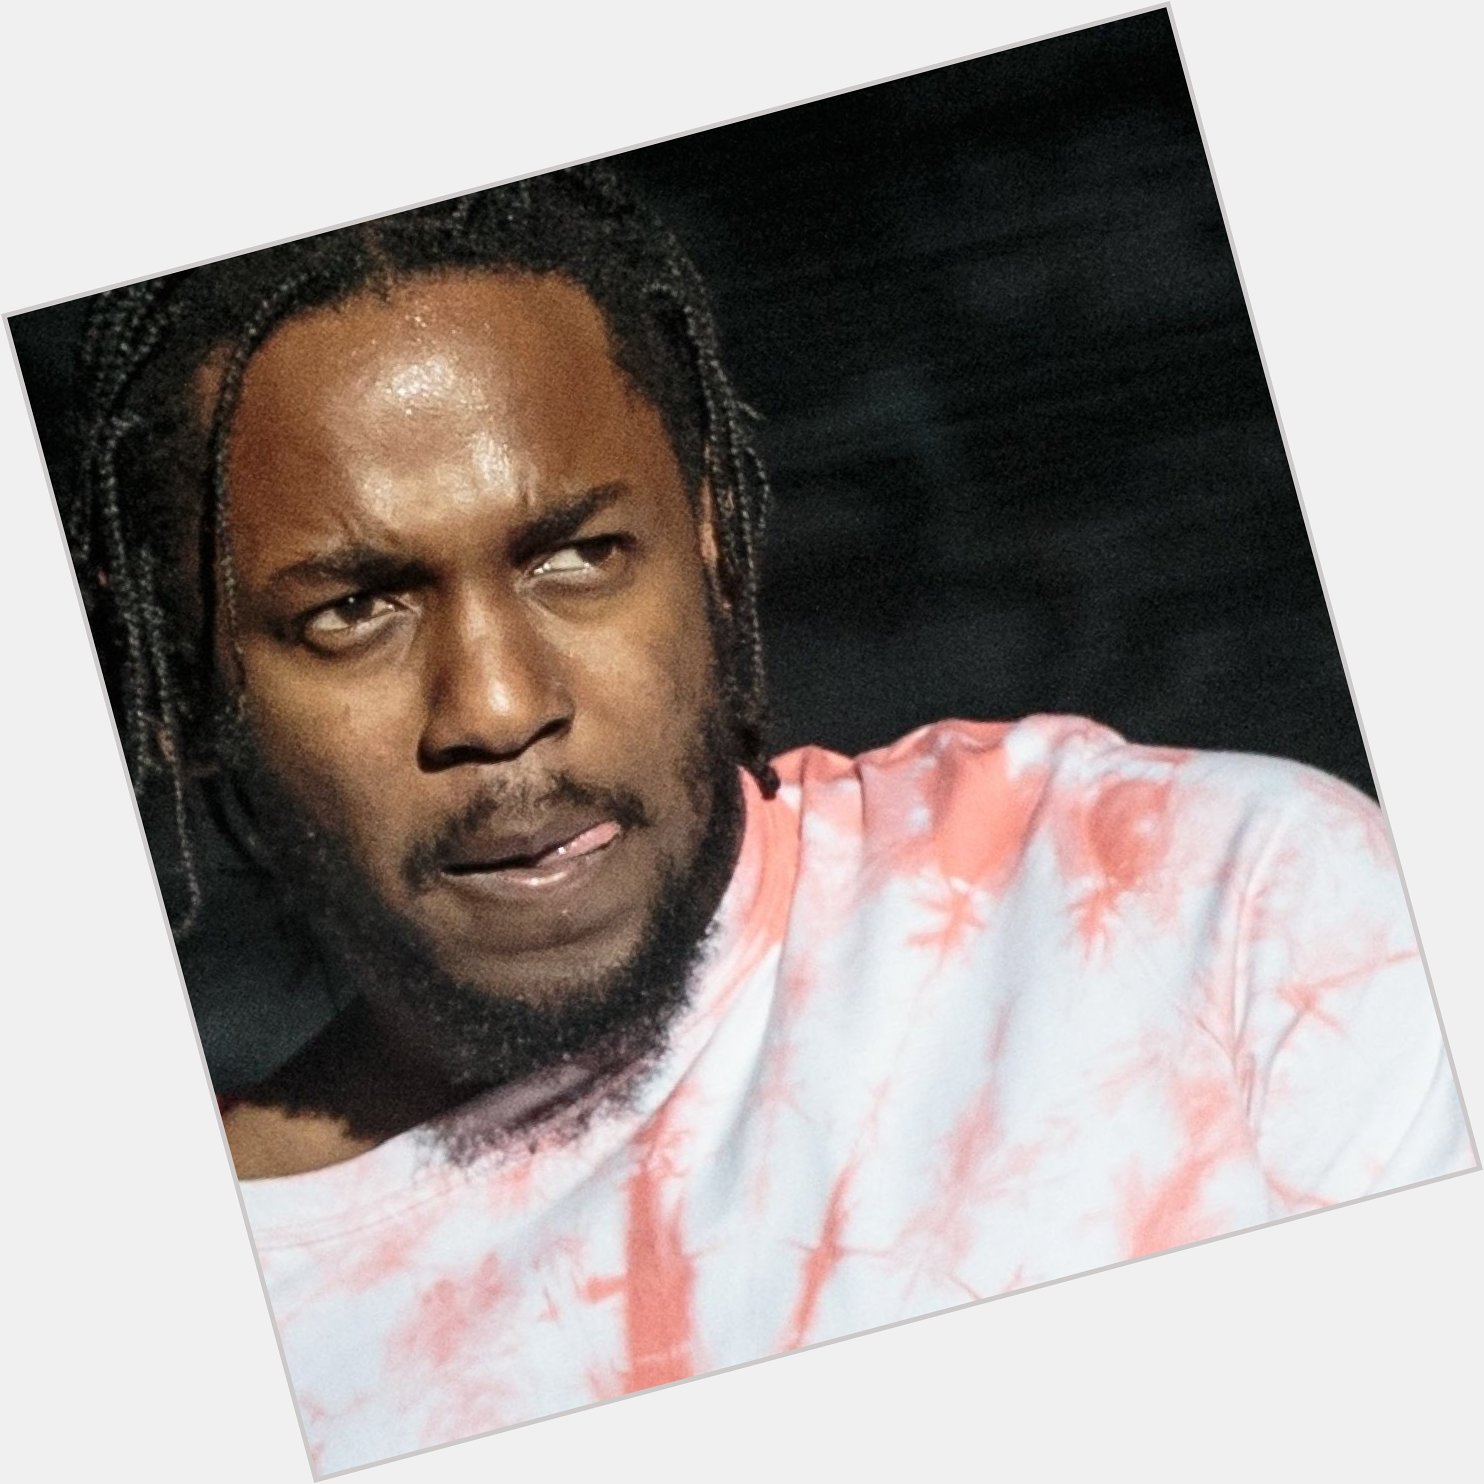 Tfw it s your birthday and your face is on the cake. Happy Birthday to one of the all time greats, Kendrick Lamar. 